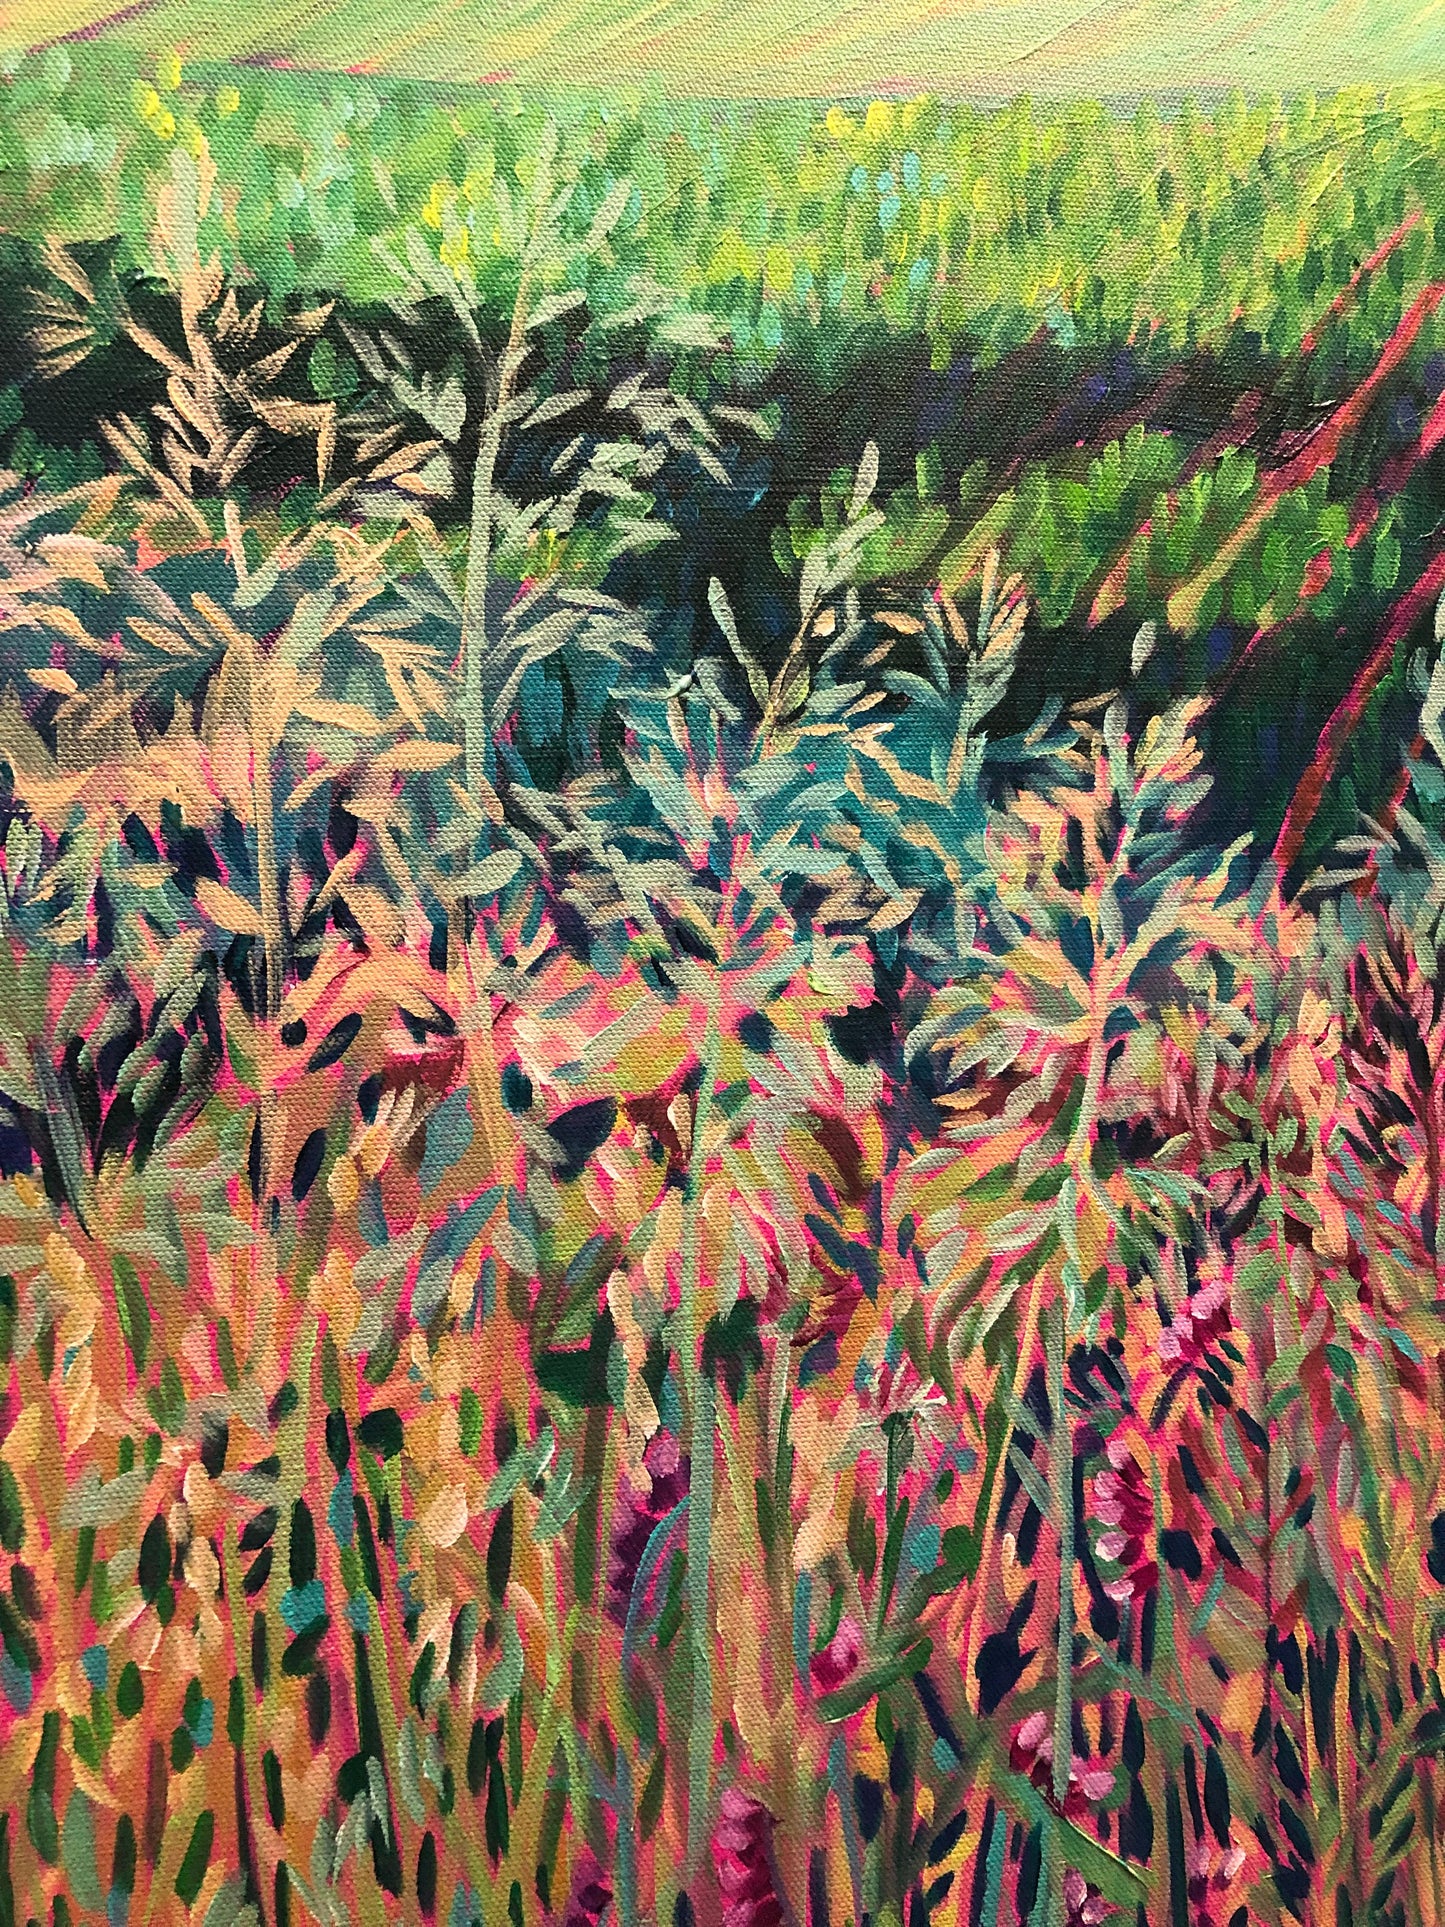 detail of hedges in painting